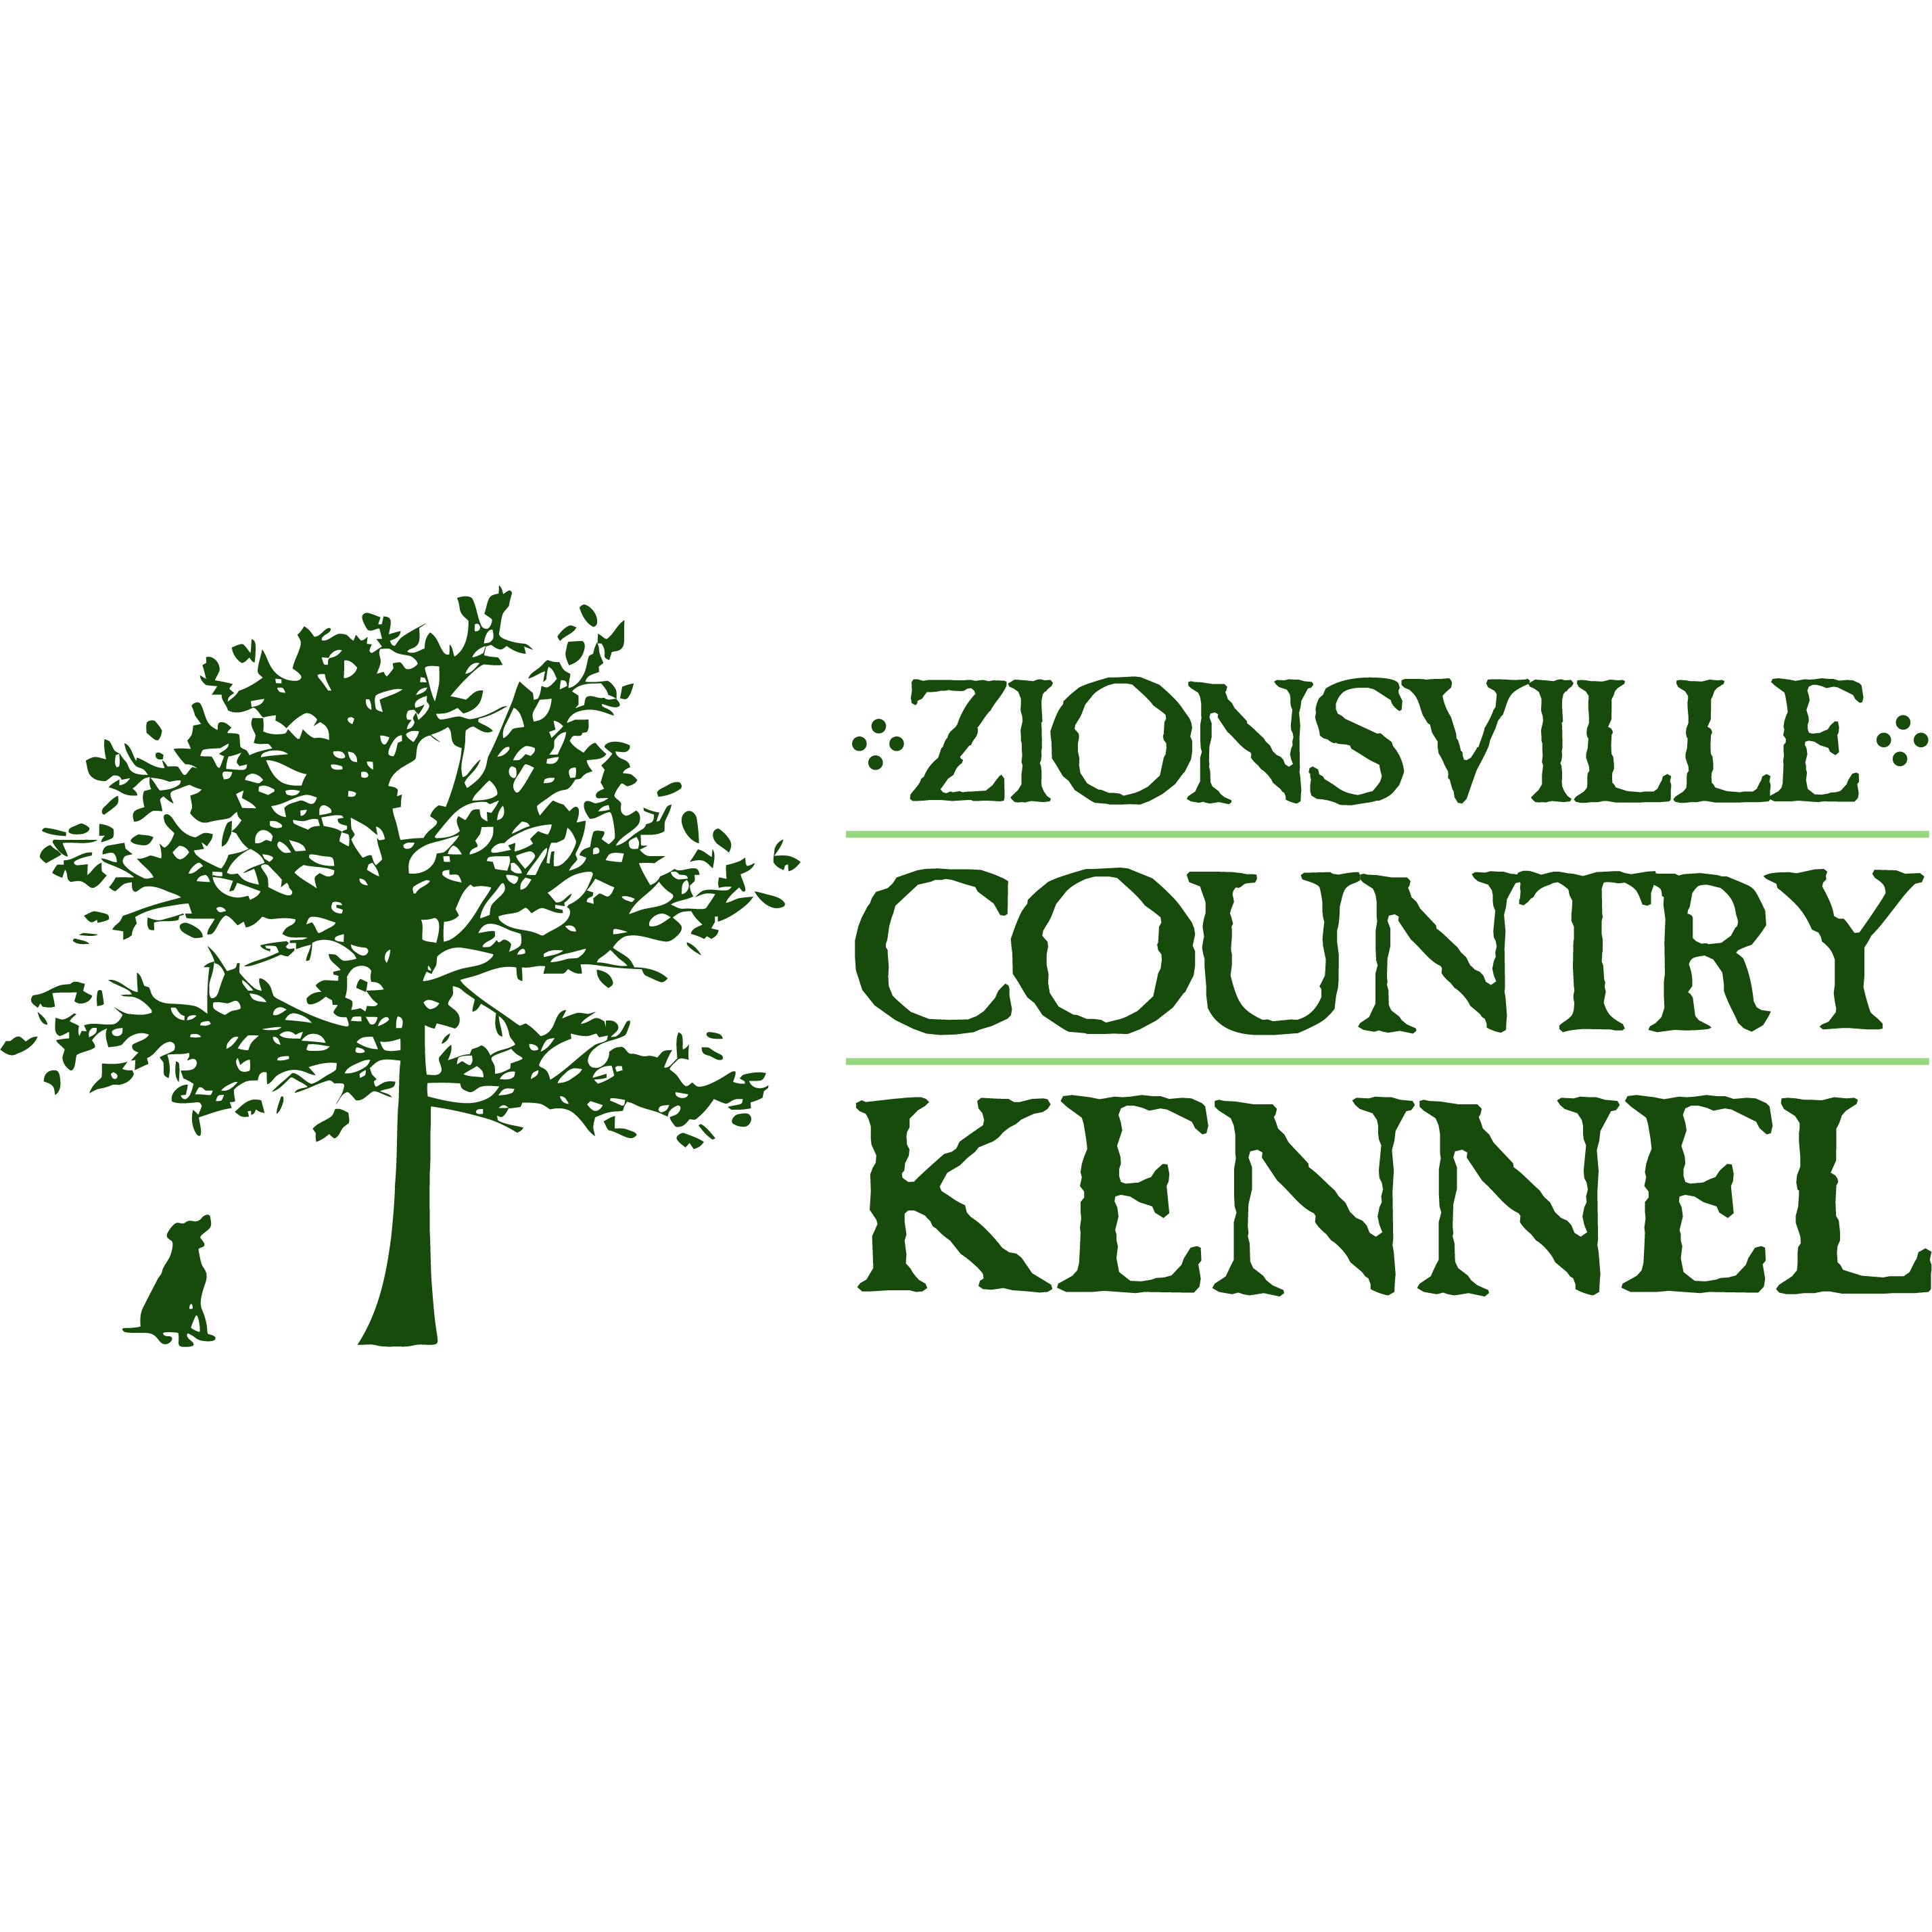 Zionsville Country Kennel